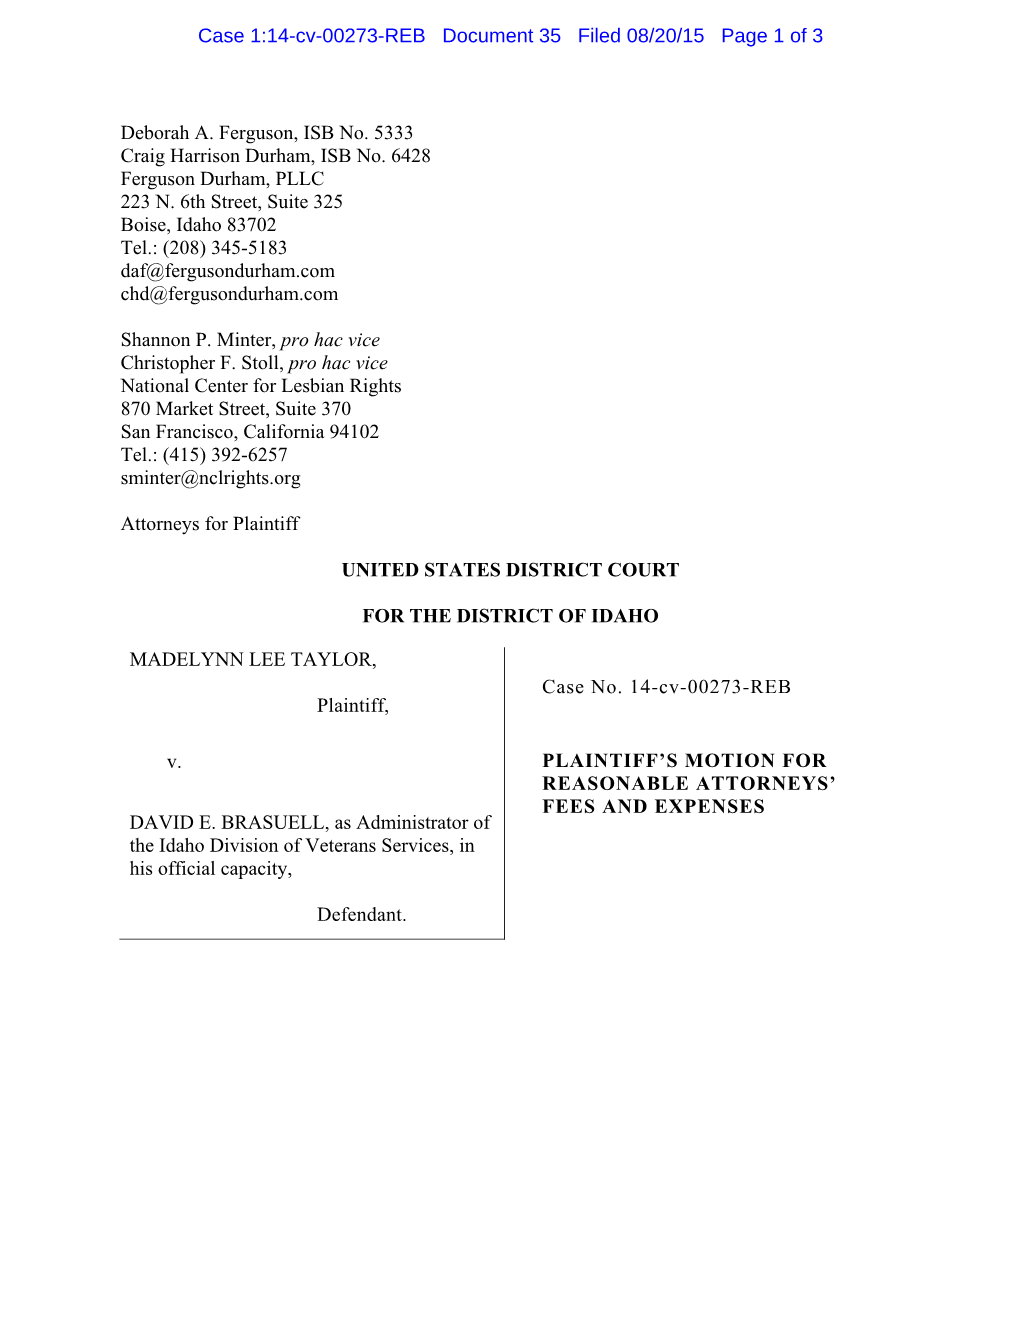 Case 1:14-Cv-00273-REB Document 35 Filed 08/20/15 Page 1 of 3